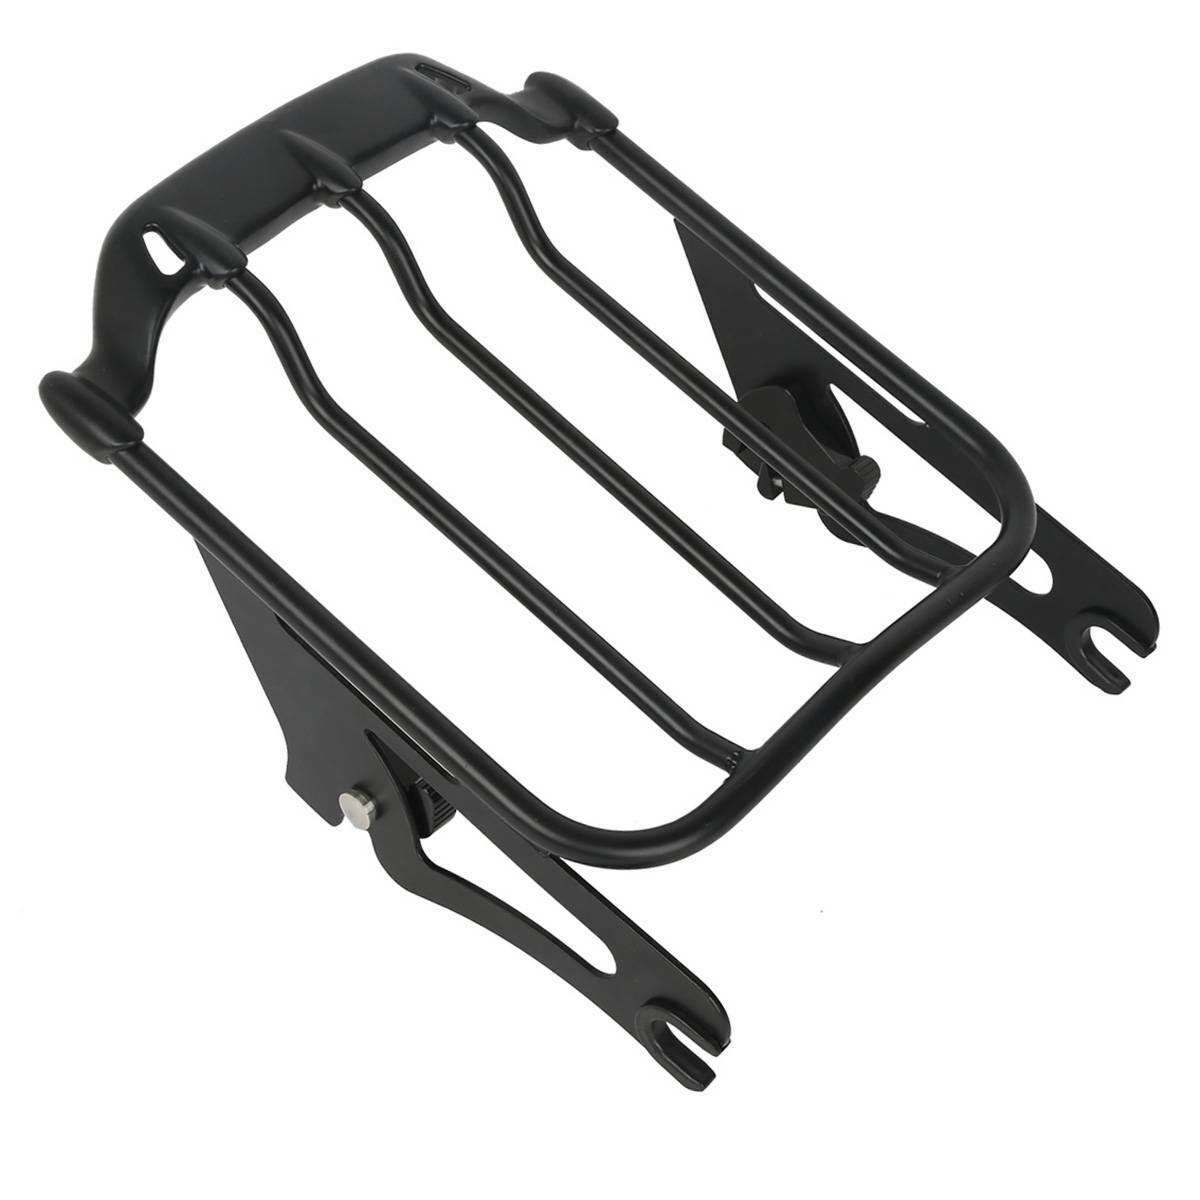 Sissy Bar Backrest Air Wing Luggage Rack Docking Fit For Harley Touring 2014+ - Moto Life Products